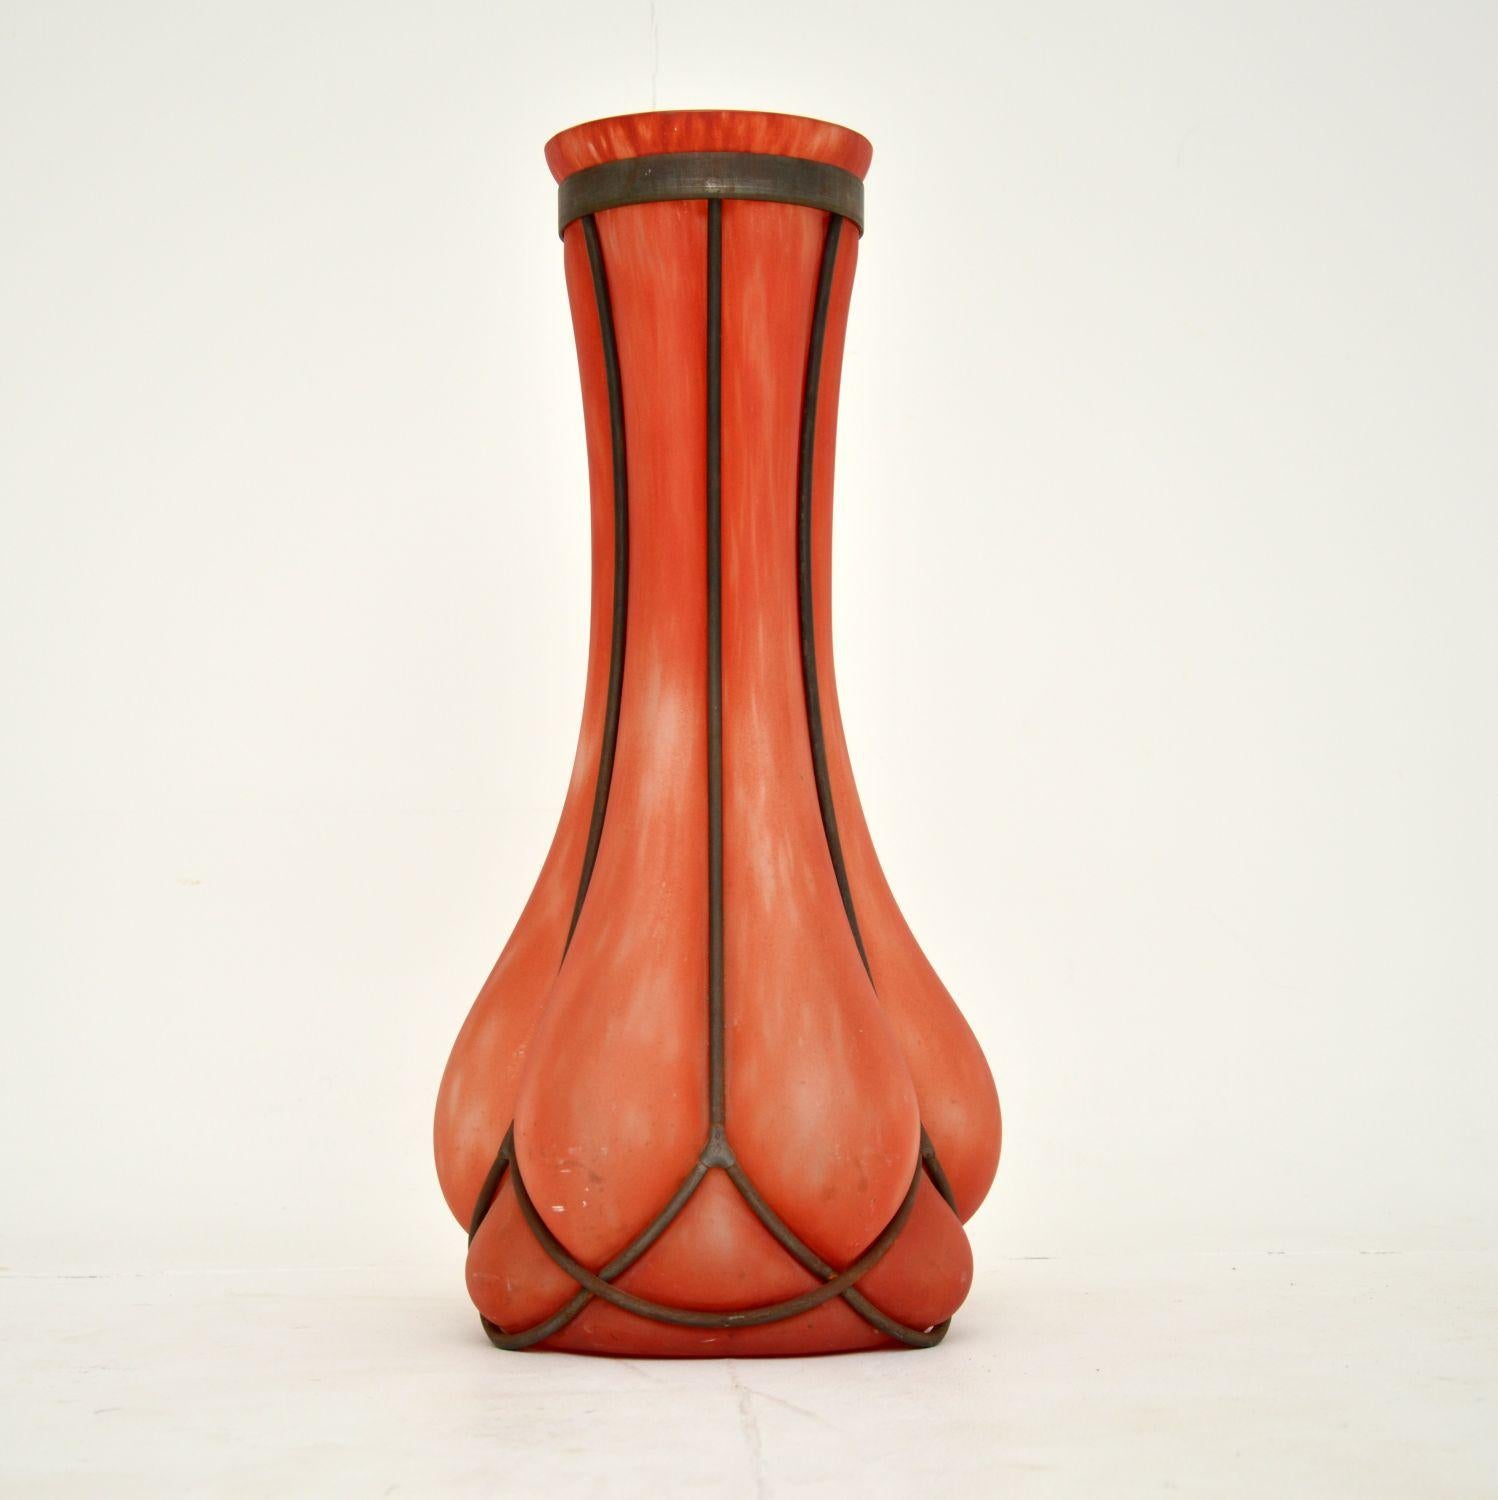 An absolutely gorgeous vintage glass and pewter vase. It’s tricky to date, but I would say this is from around the 1930-50’s, but it could be older.

It is beautifully made and is a large and impressive size. The red glass would have been blown